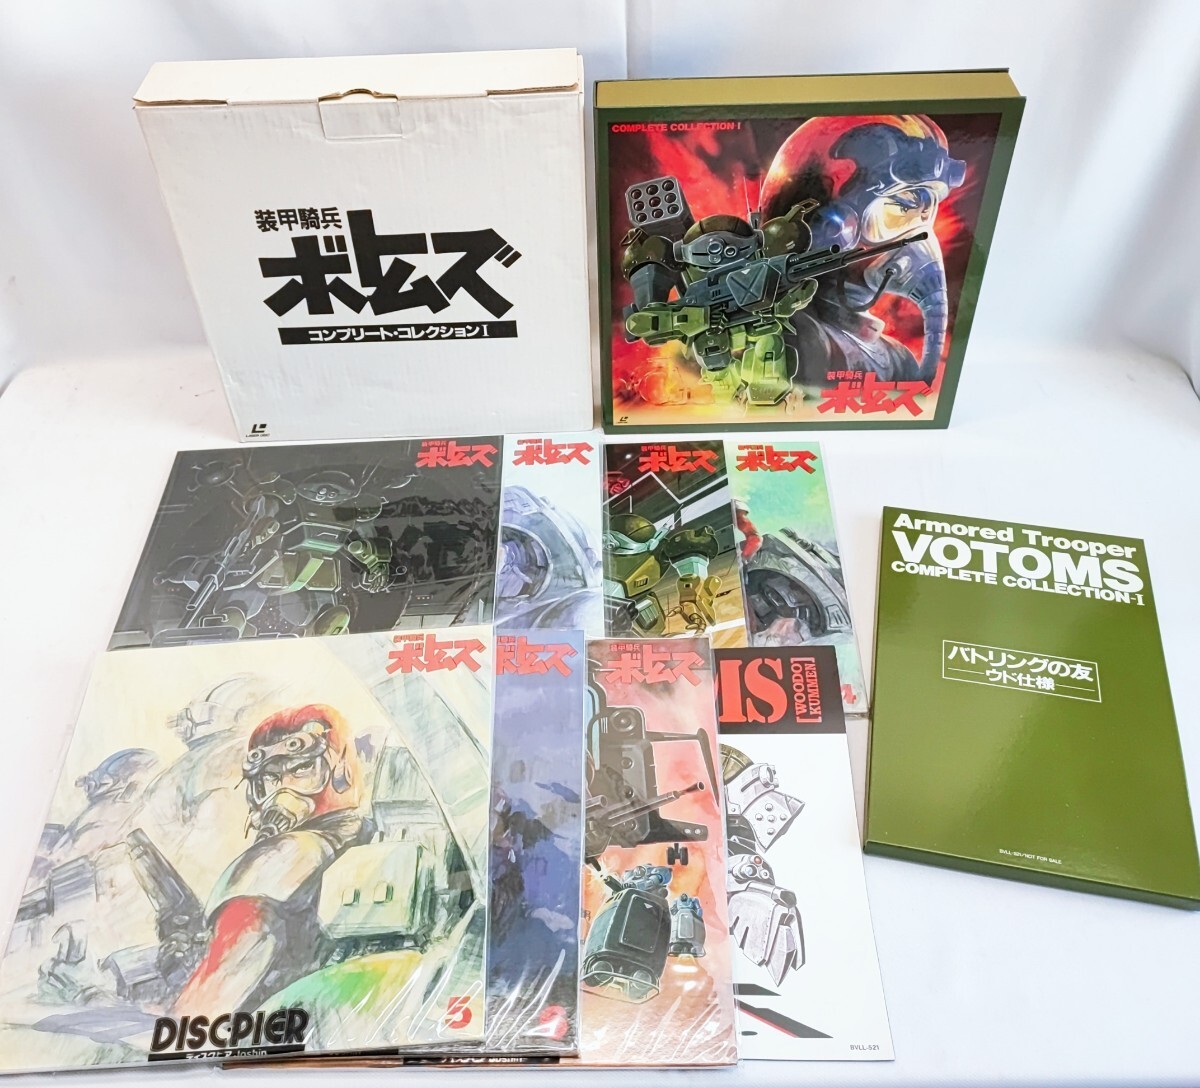 [.. goods ] Armored Trooper Votoms Complete collection Ⅰ LD laser disk beautiful goods that time thing collection box attaching bato ring. .(042432)